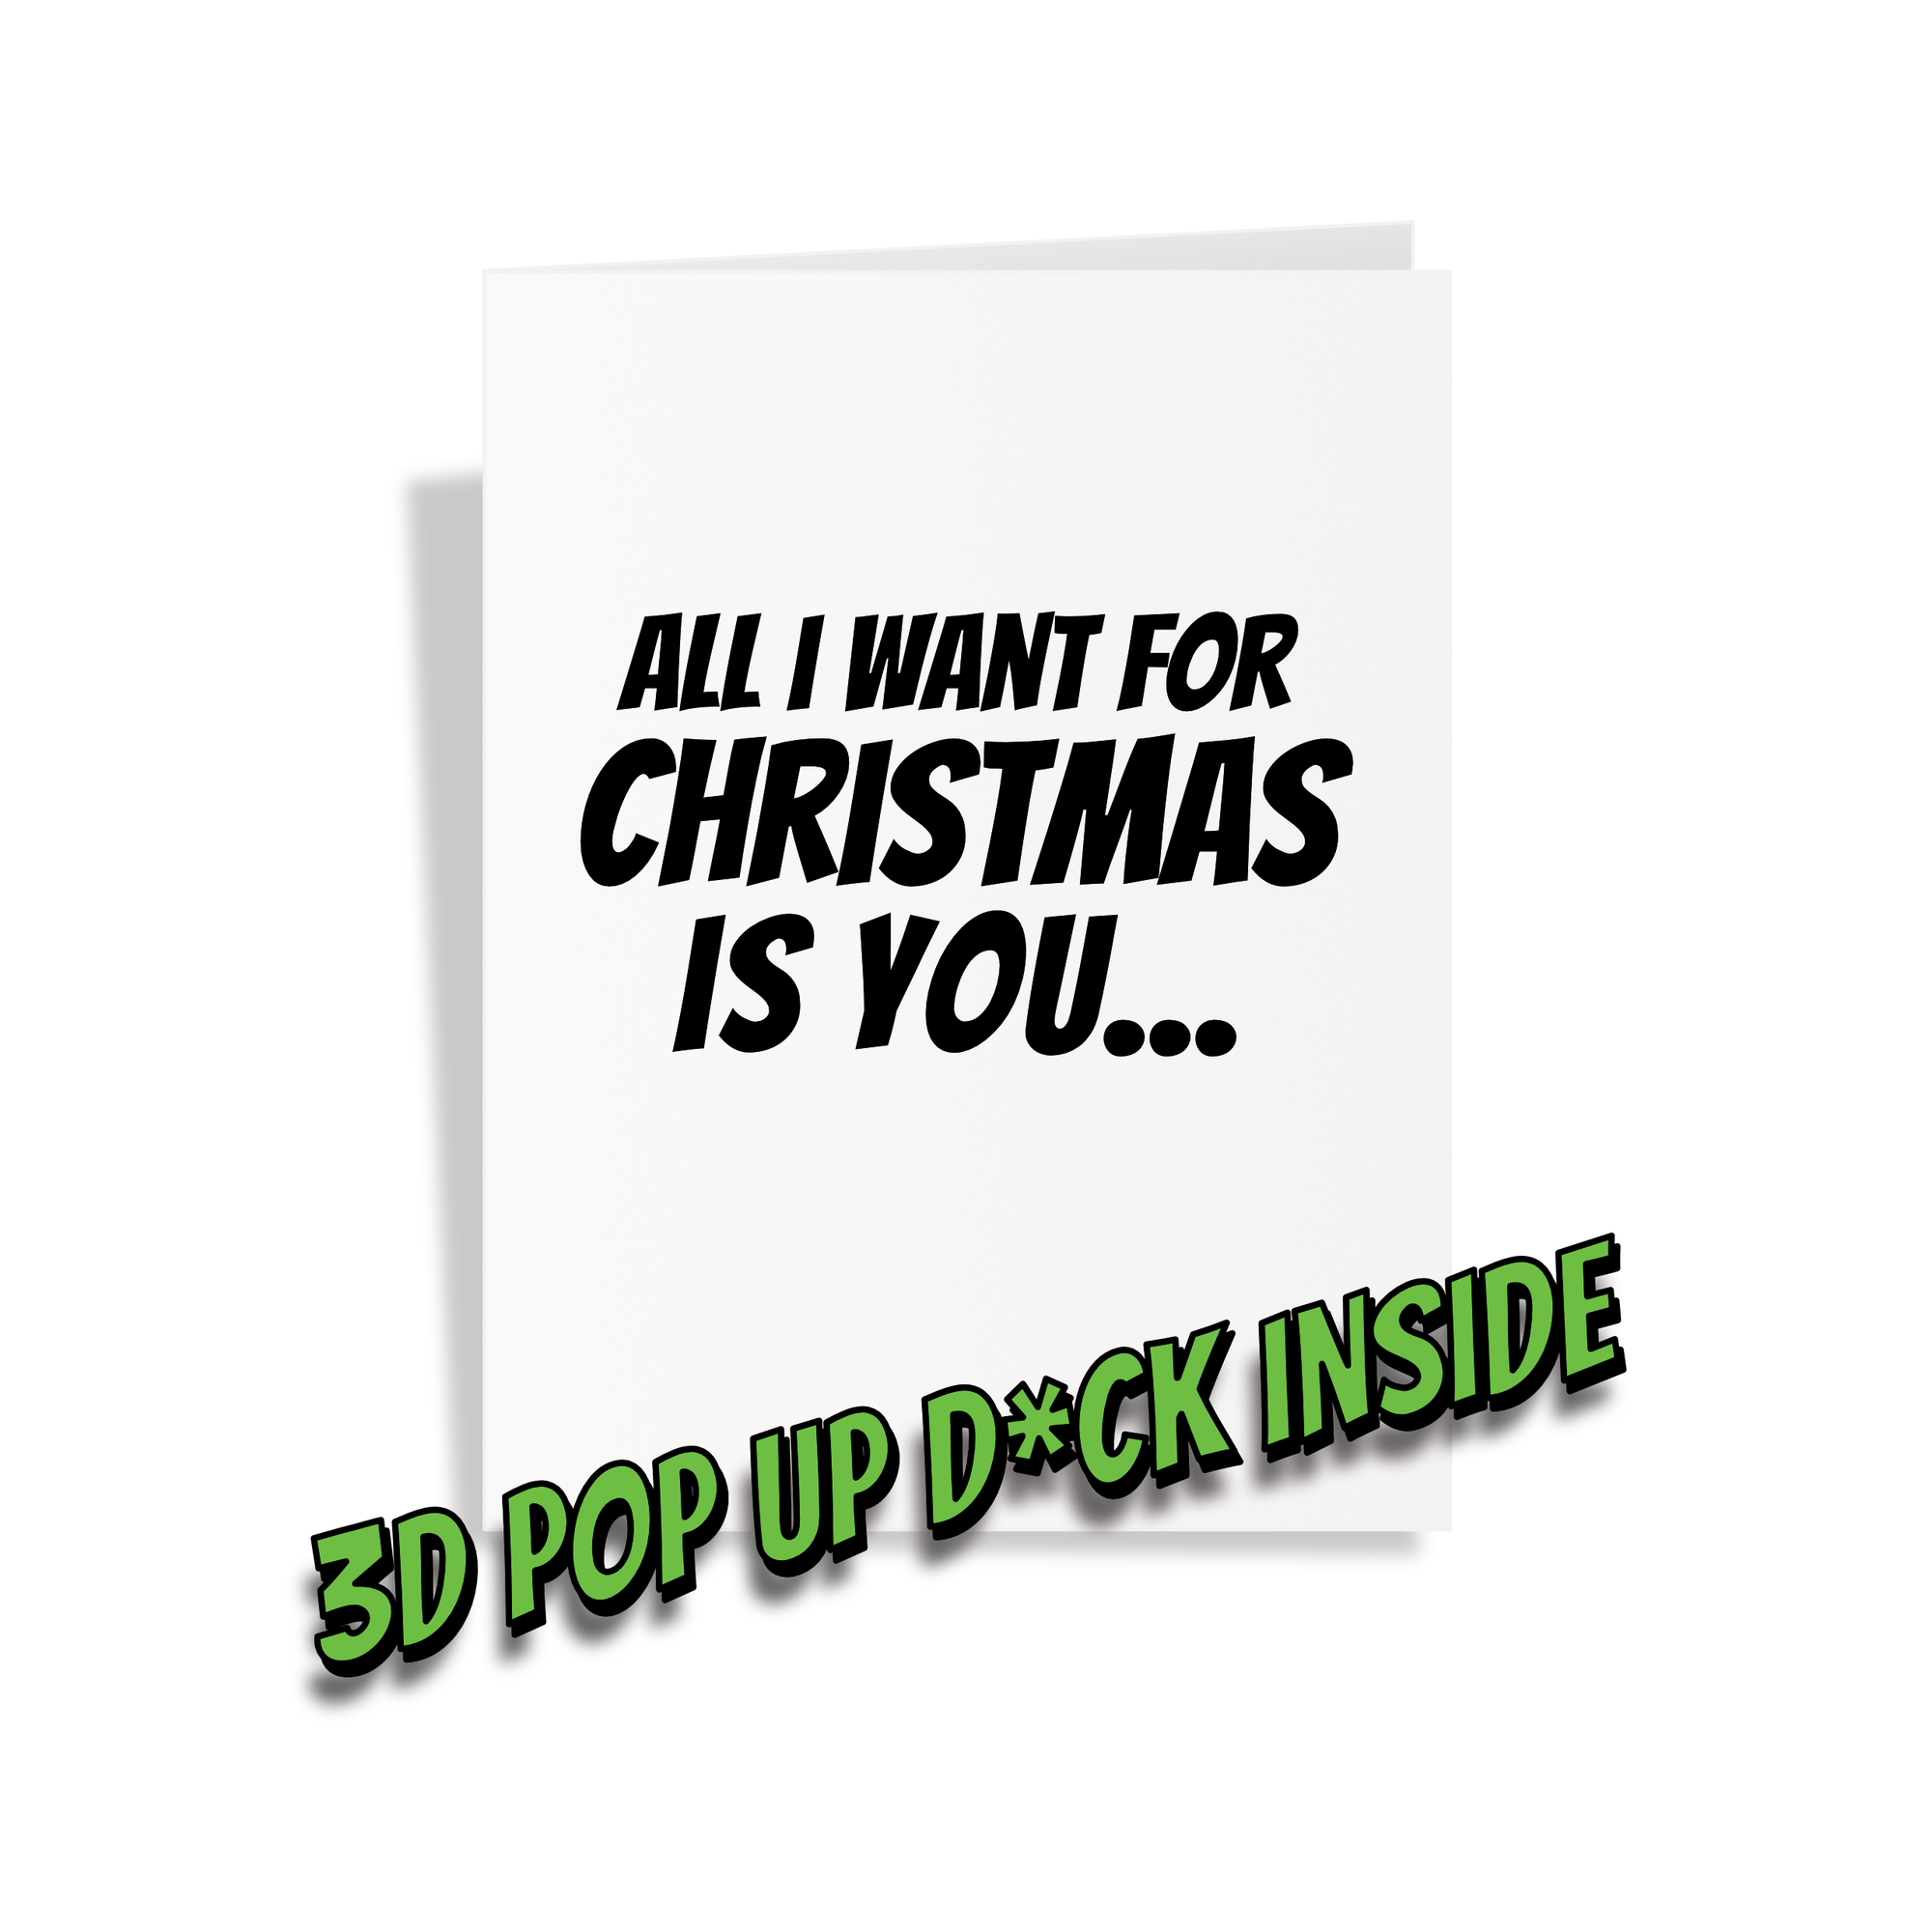 Tits Your Birthday - 3D Pop Up Boob Card - Dicks By Mail